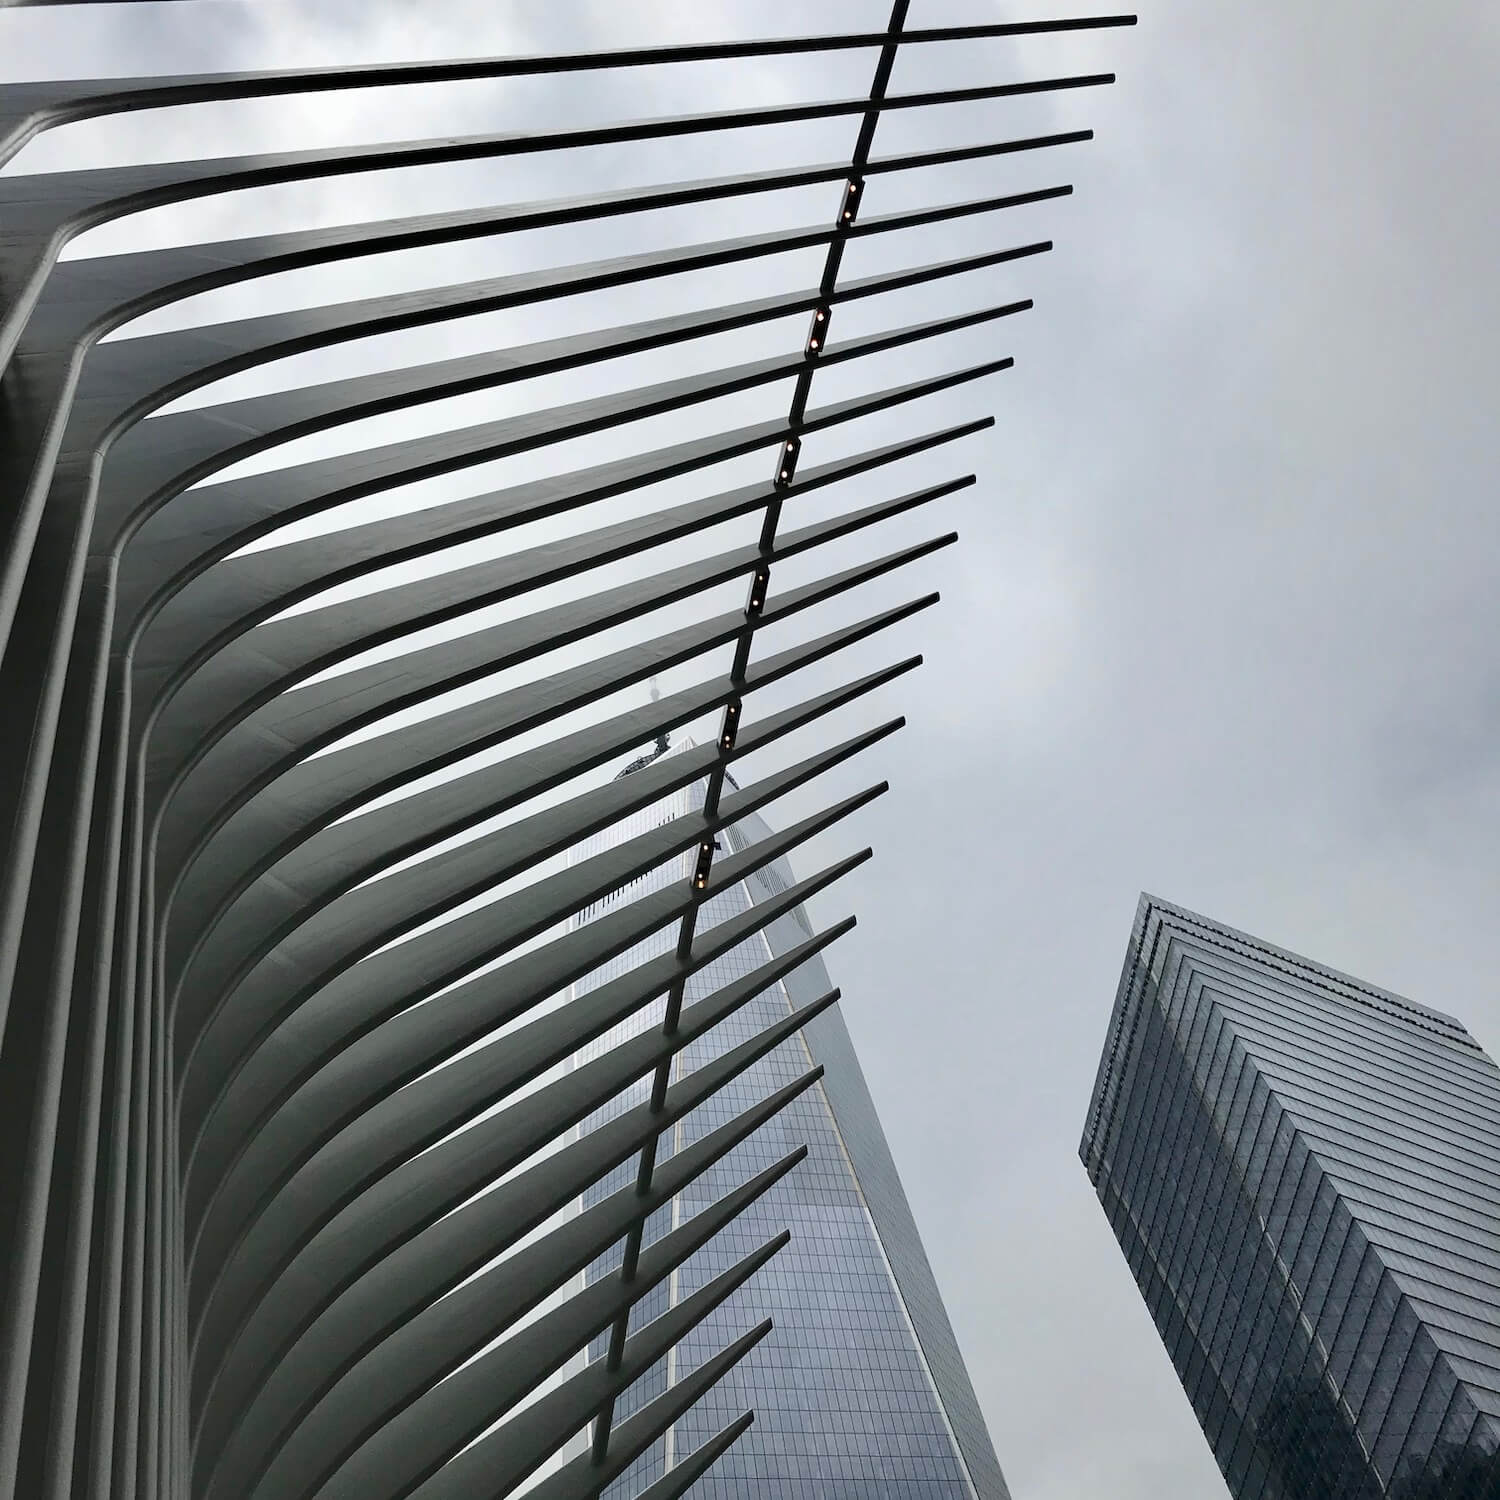 The large spine like spires of the Oculus structure near the memorial for 9/11 in New York City near Ground Zero reach up to the sky towards the new World Trade Center.